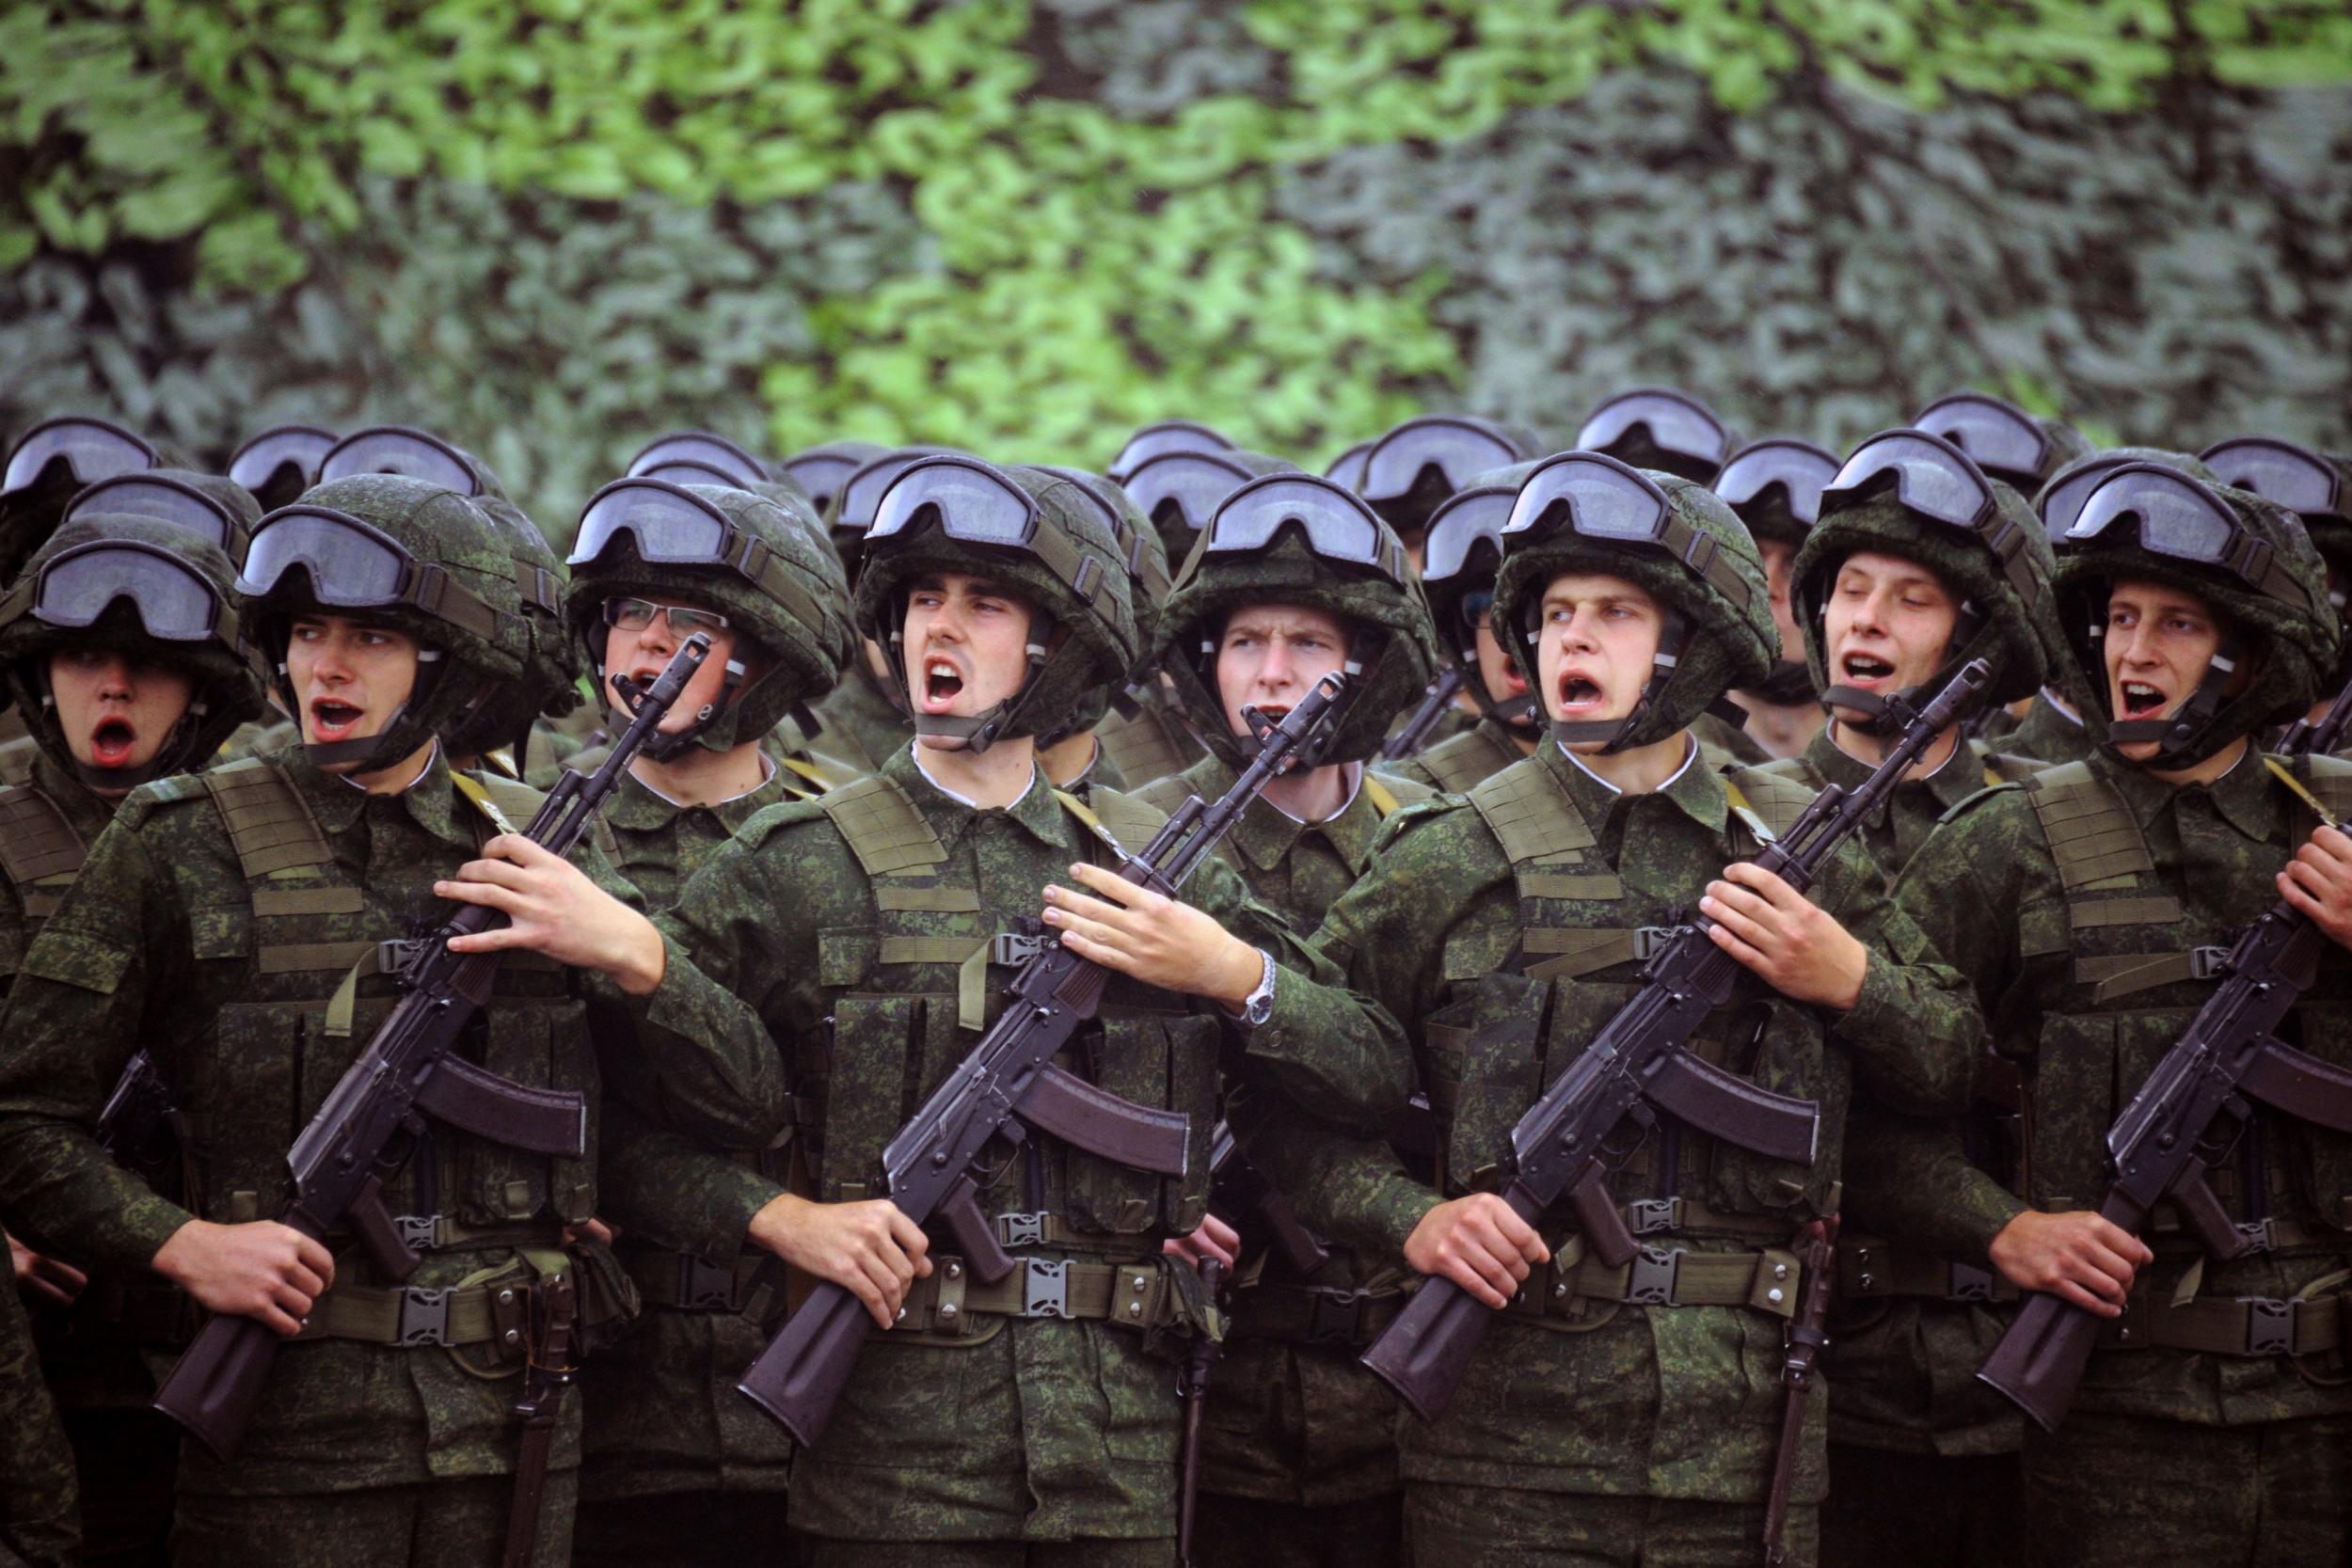 Belarus's military benefited from UK military training for several years running